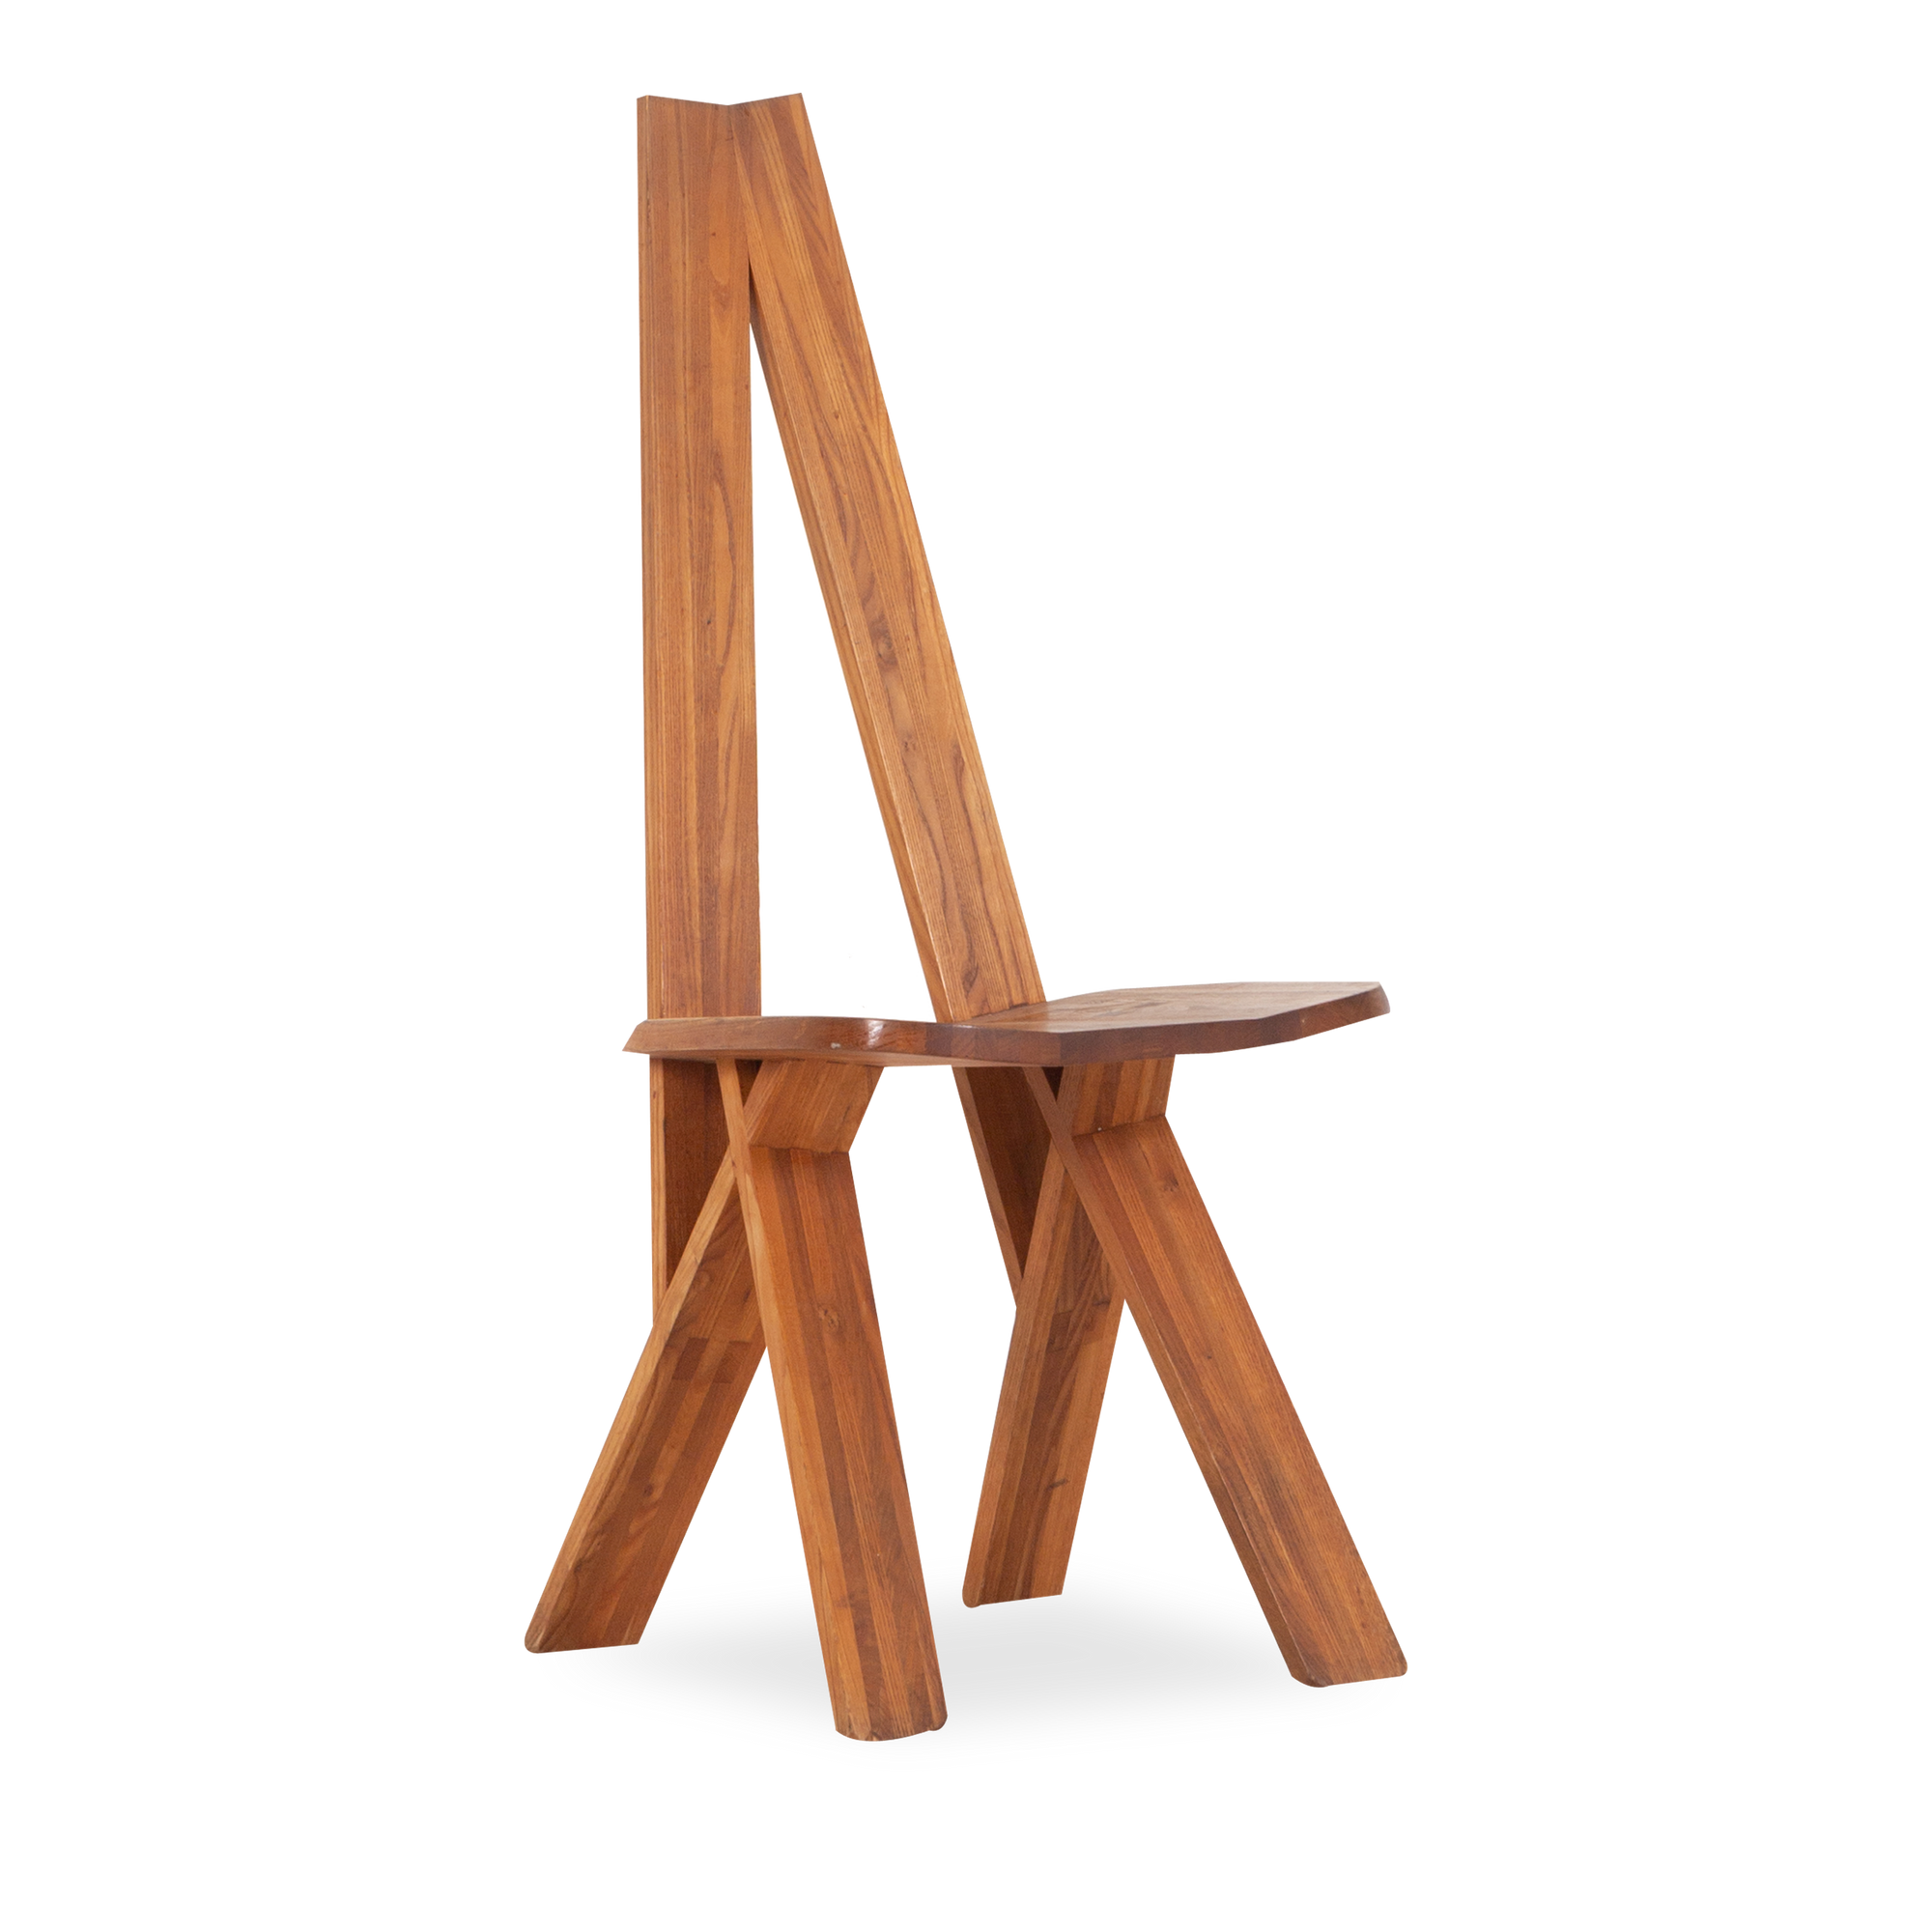 Combining traditional craftsmanship with a unique perspective on architectural design, this vintage S45 chair was designed by Pierre Chapo and was manufactured in his own workshop.